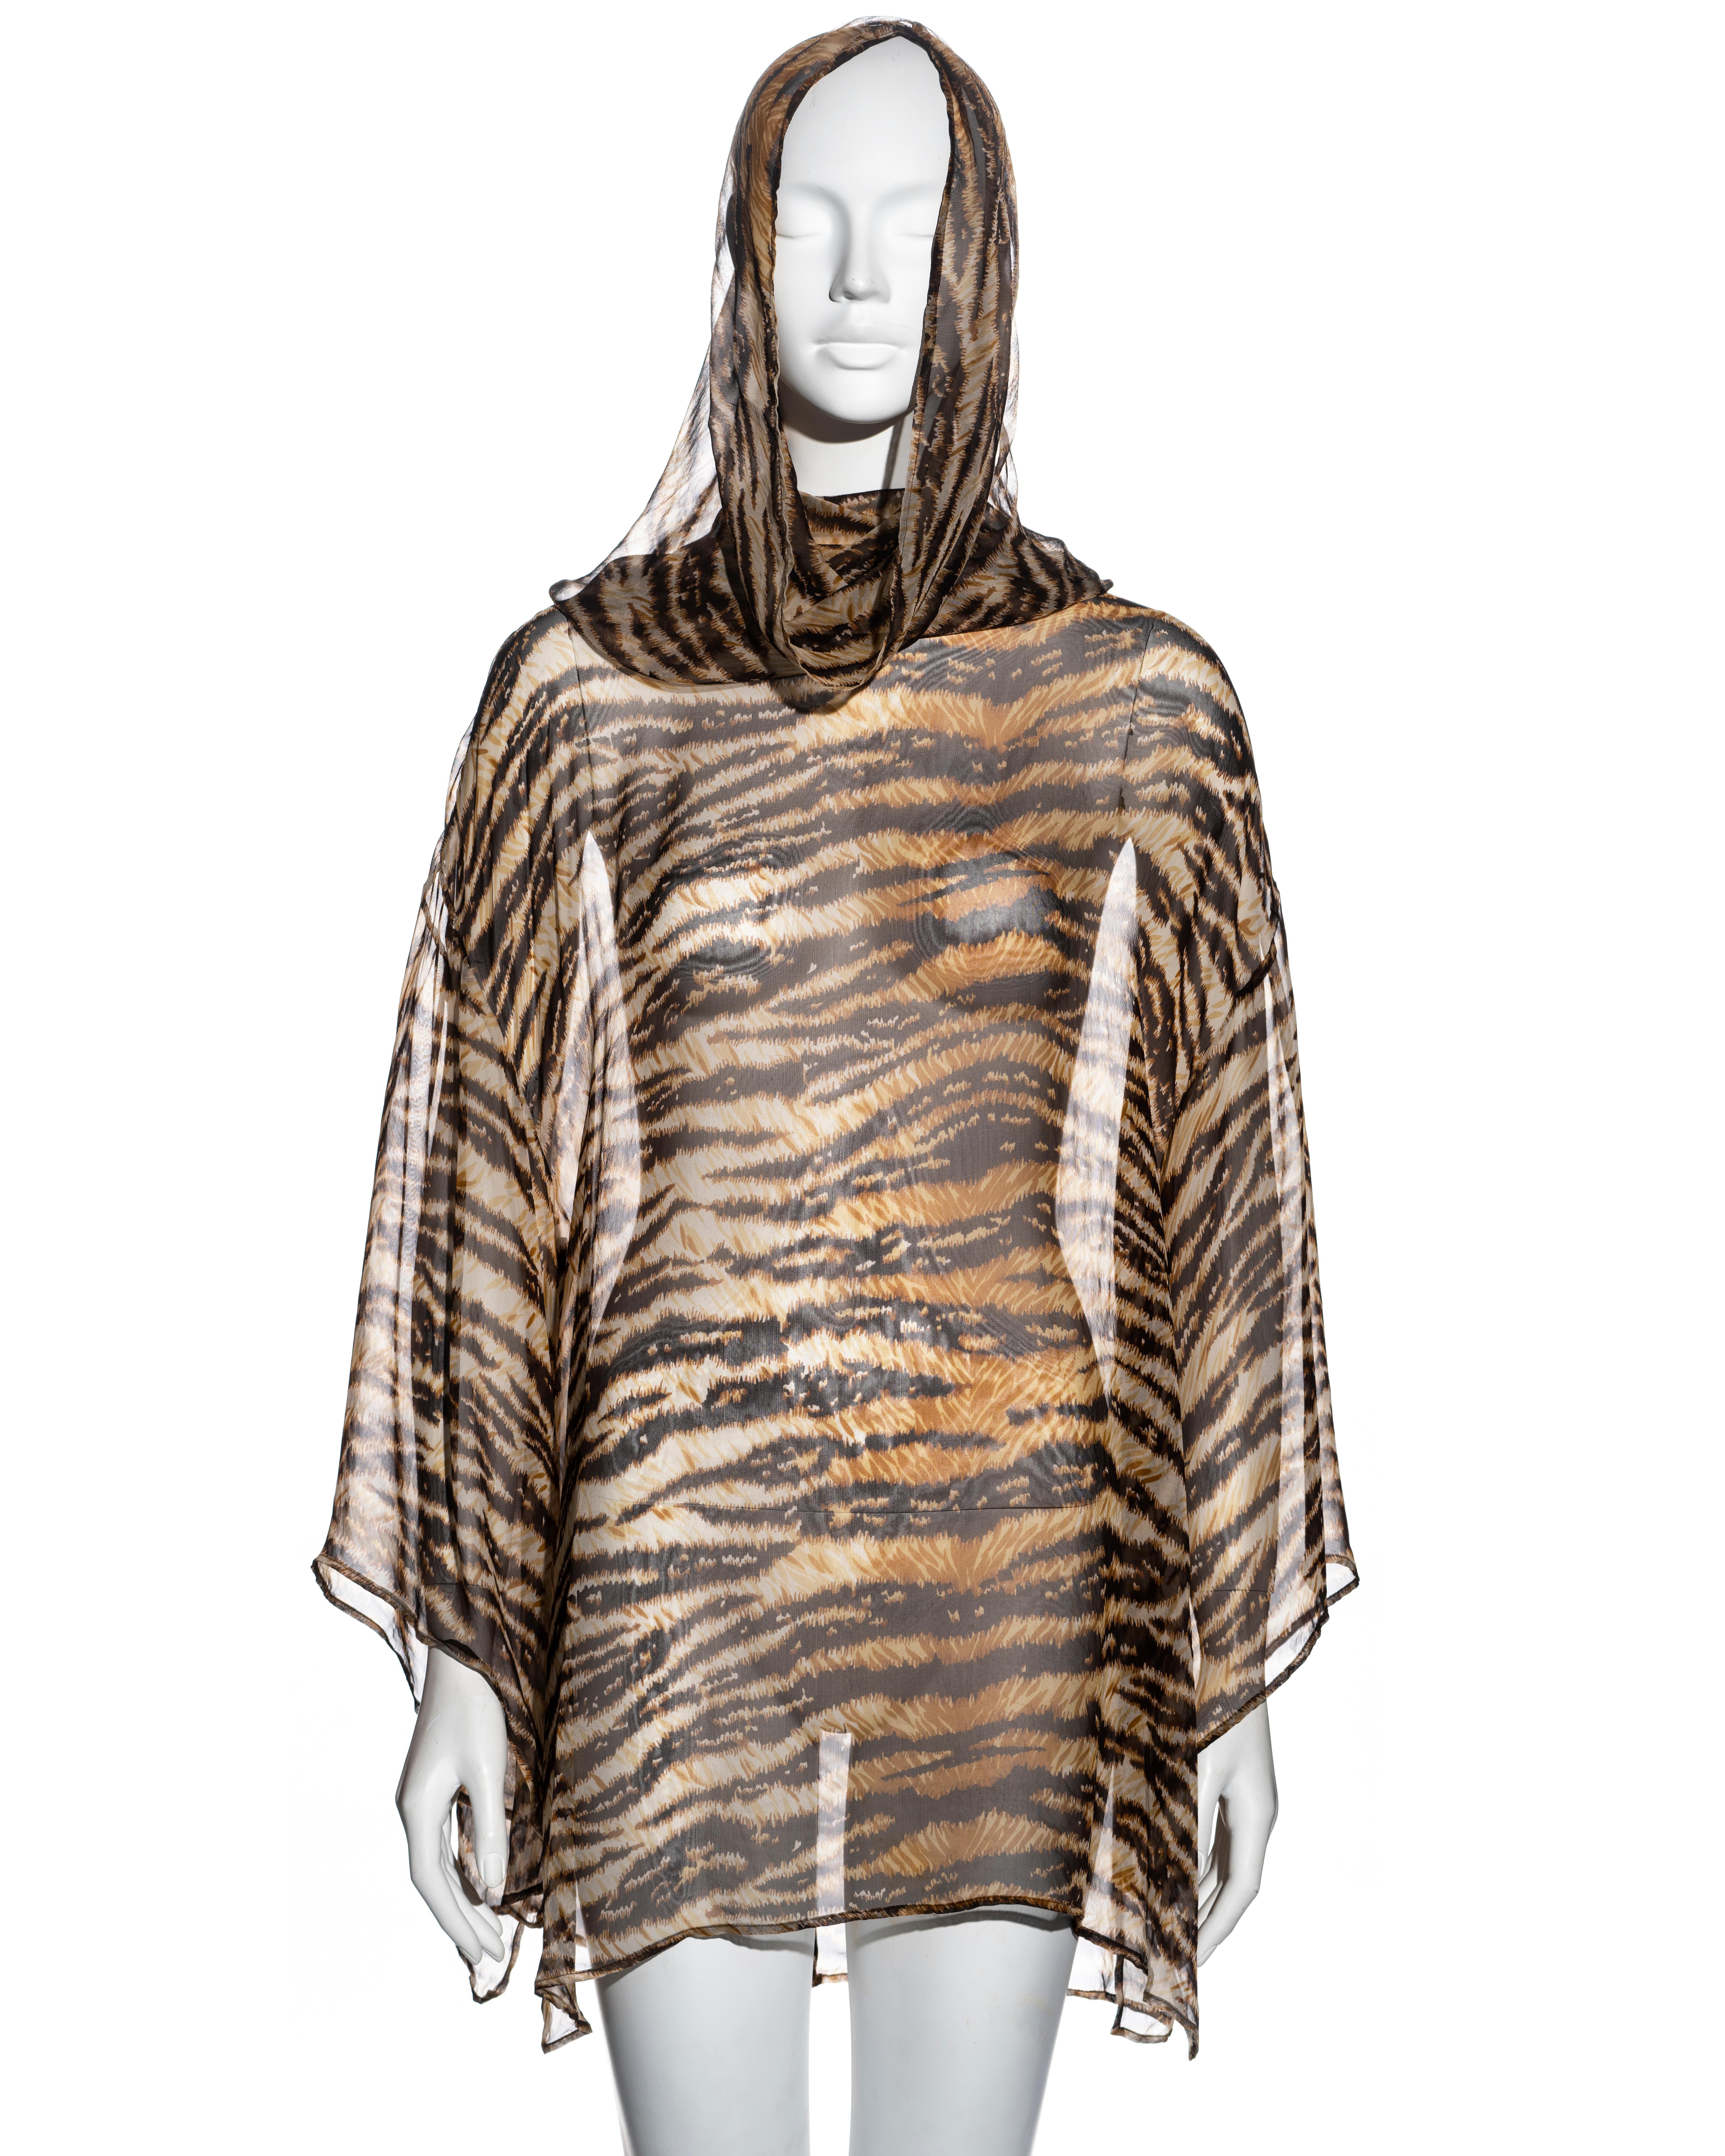 ▪ Dolce & Gabbana tunic dress 
▪ Fine silk chiffon with a tiger print 
▪ Wide sleeves 
▪ Long draped hood
▪ Side slits 
▪ One Size 
▪ Spring-Summer 1996
▪ 100% Silk
▪ Made in Italy